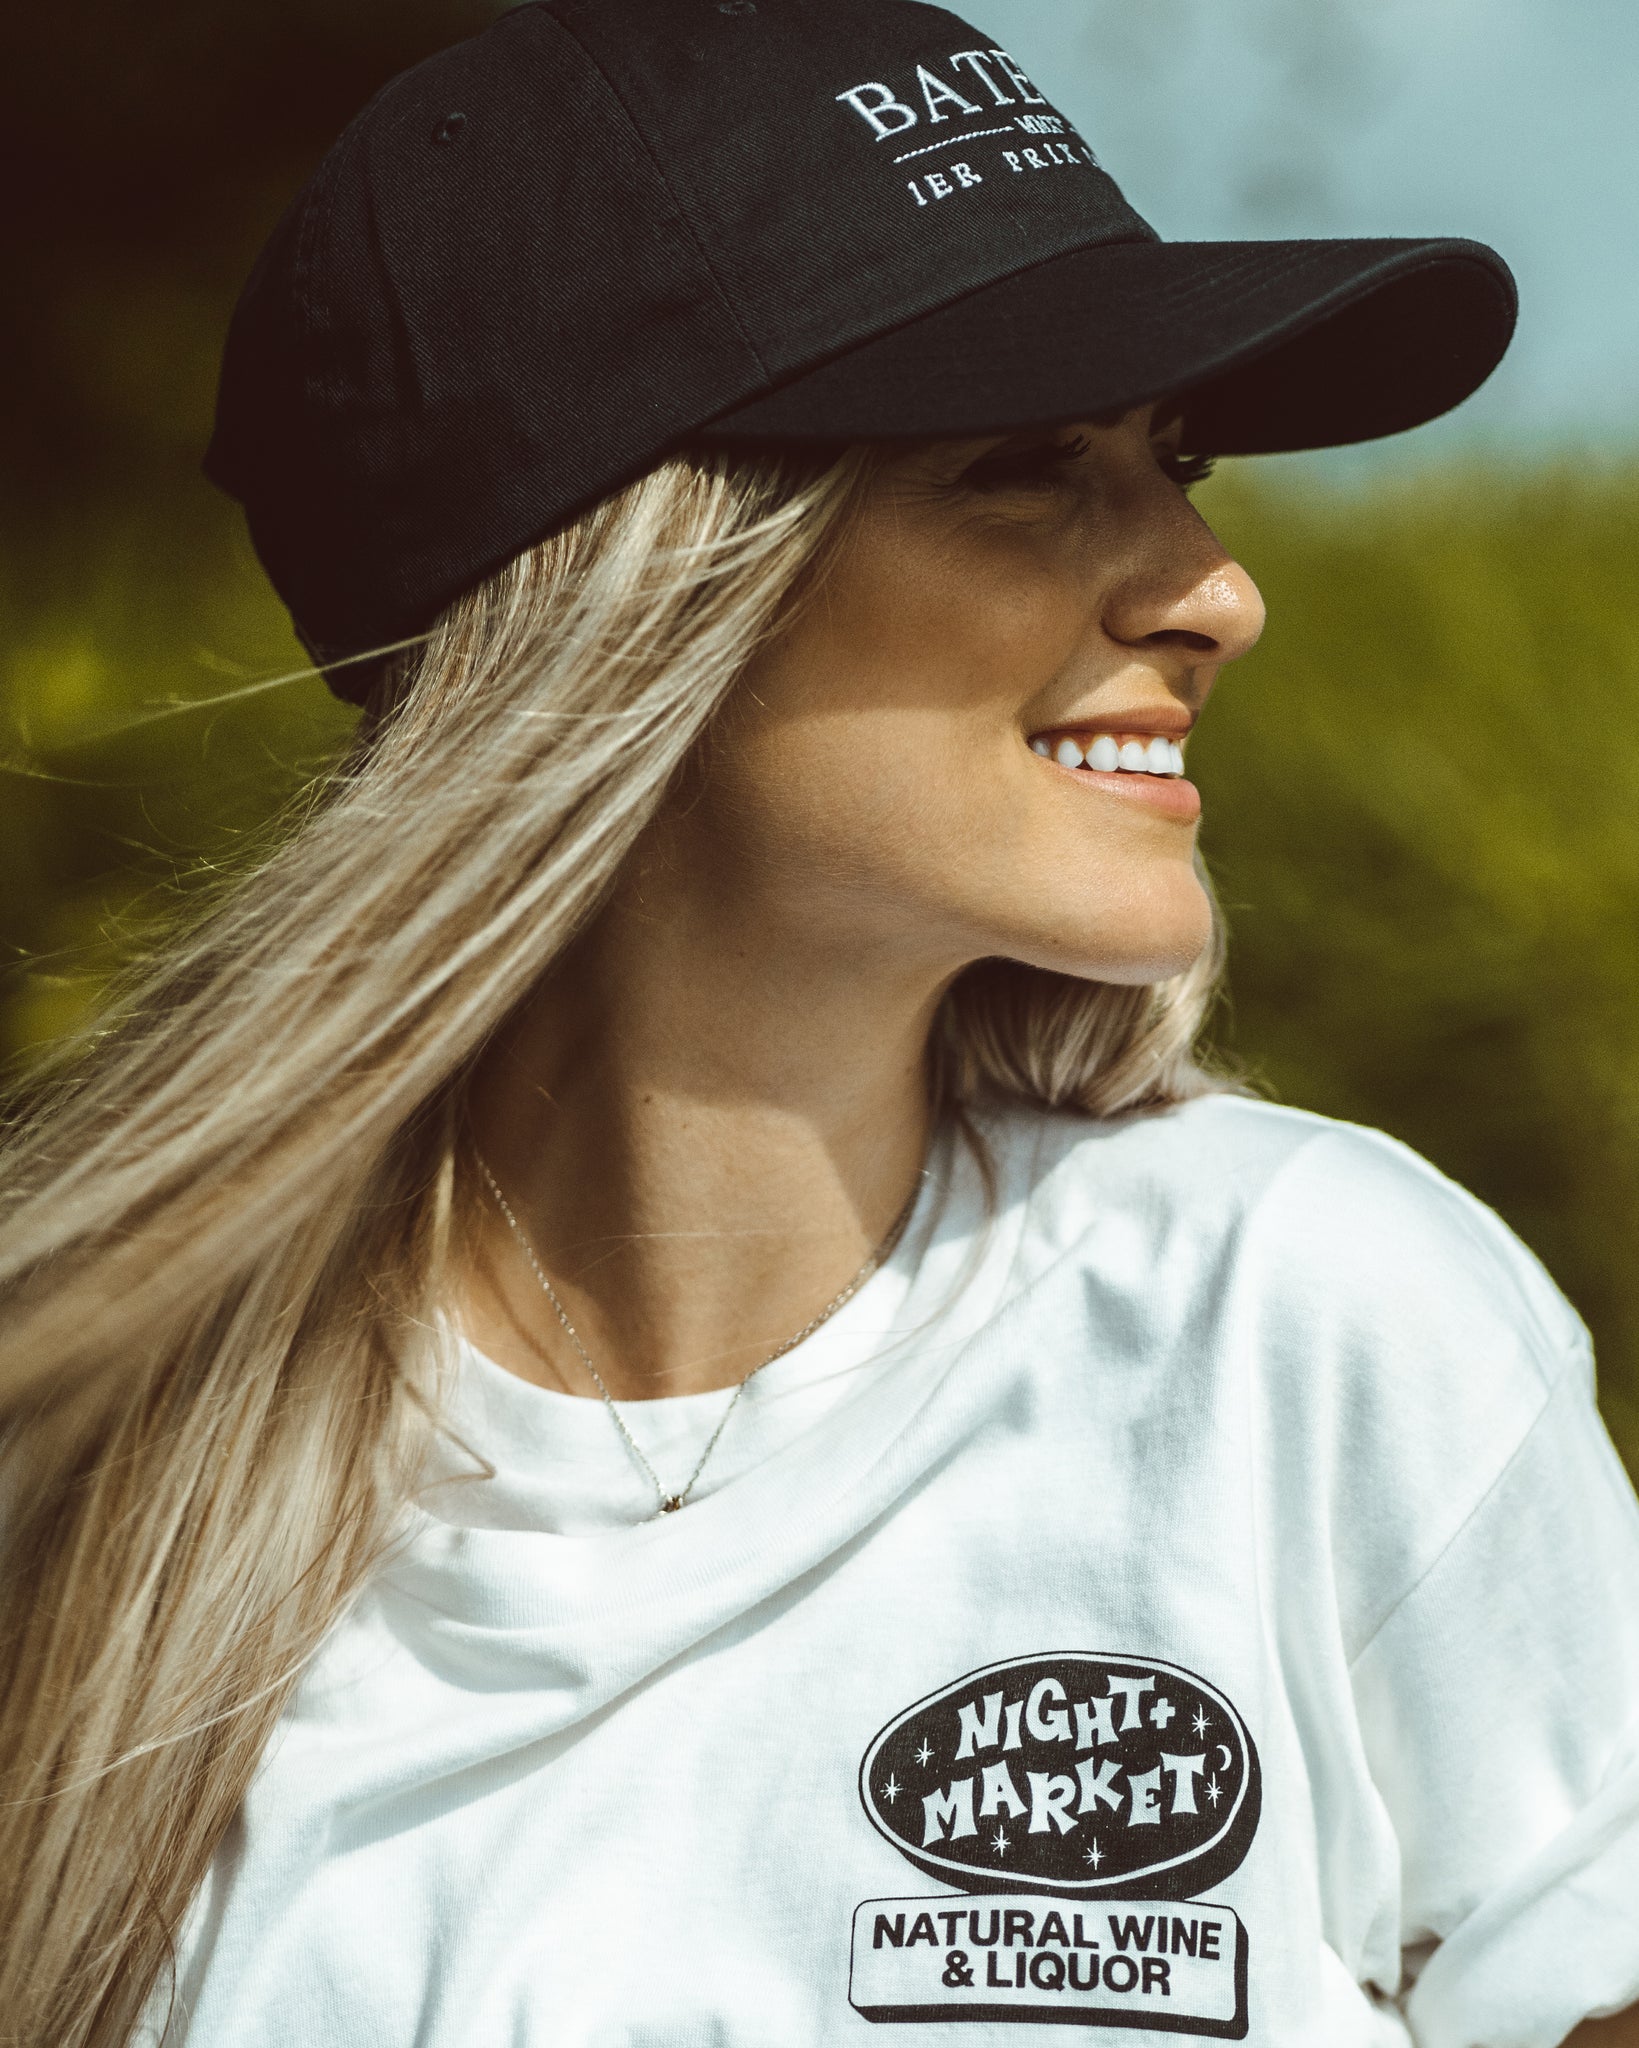 Girl smiling and wearing a Bateau restaurant navy baseball hat and white Night Marketing restaurant t-shirt.